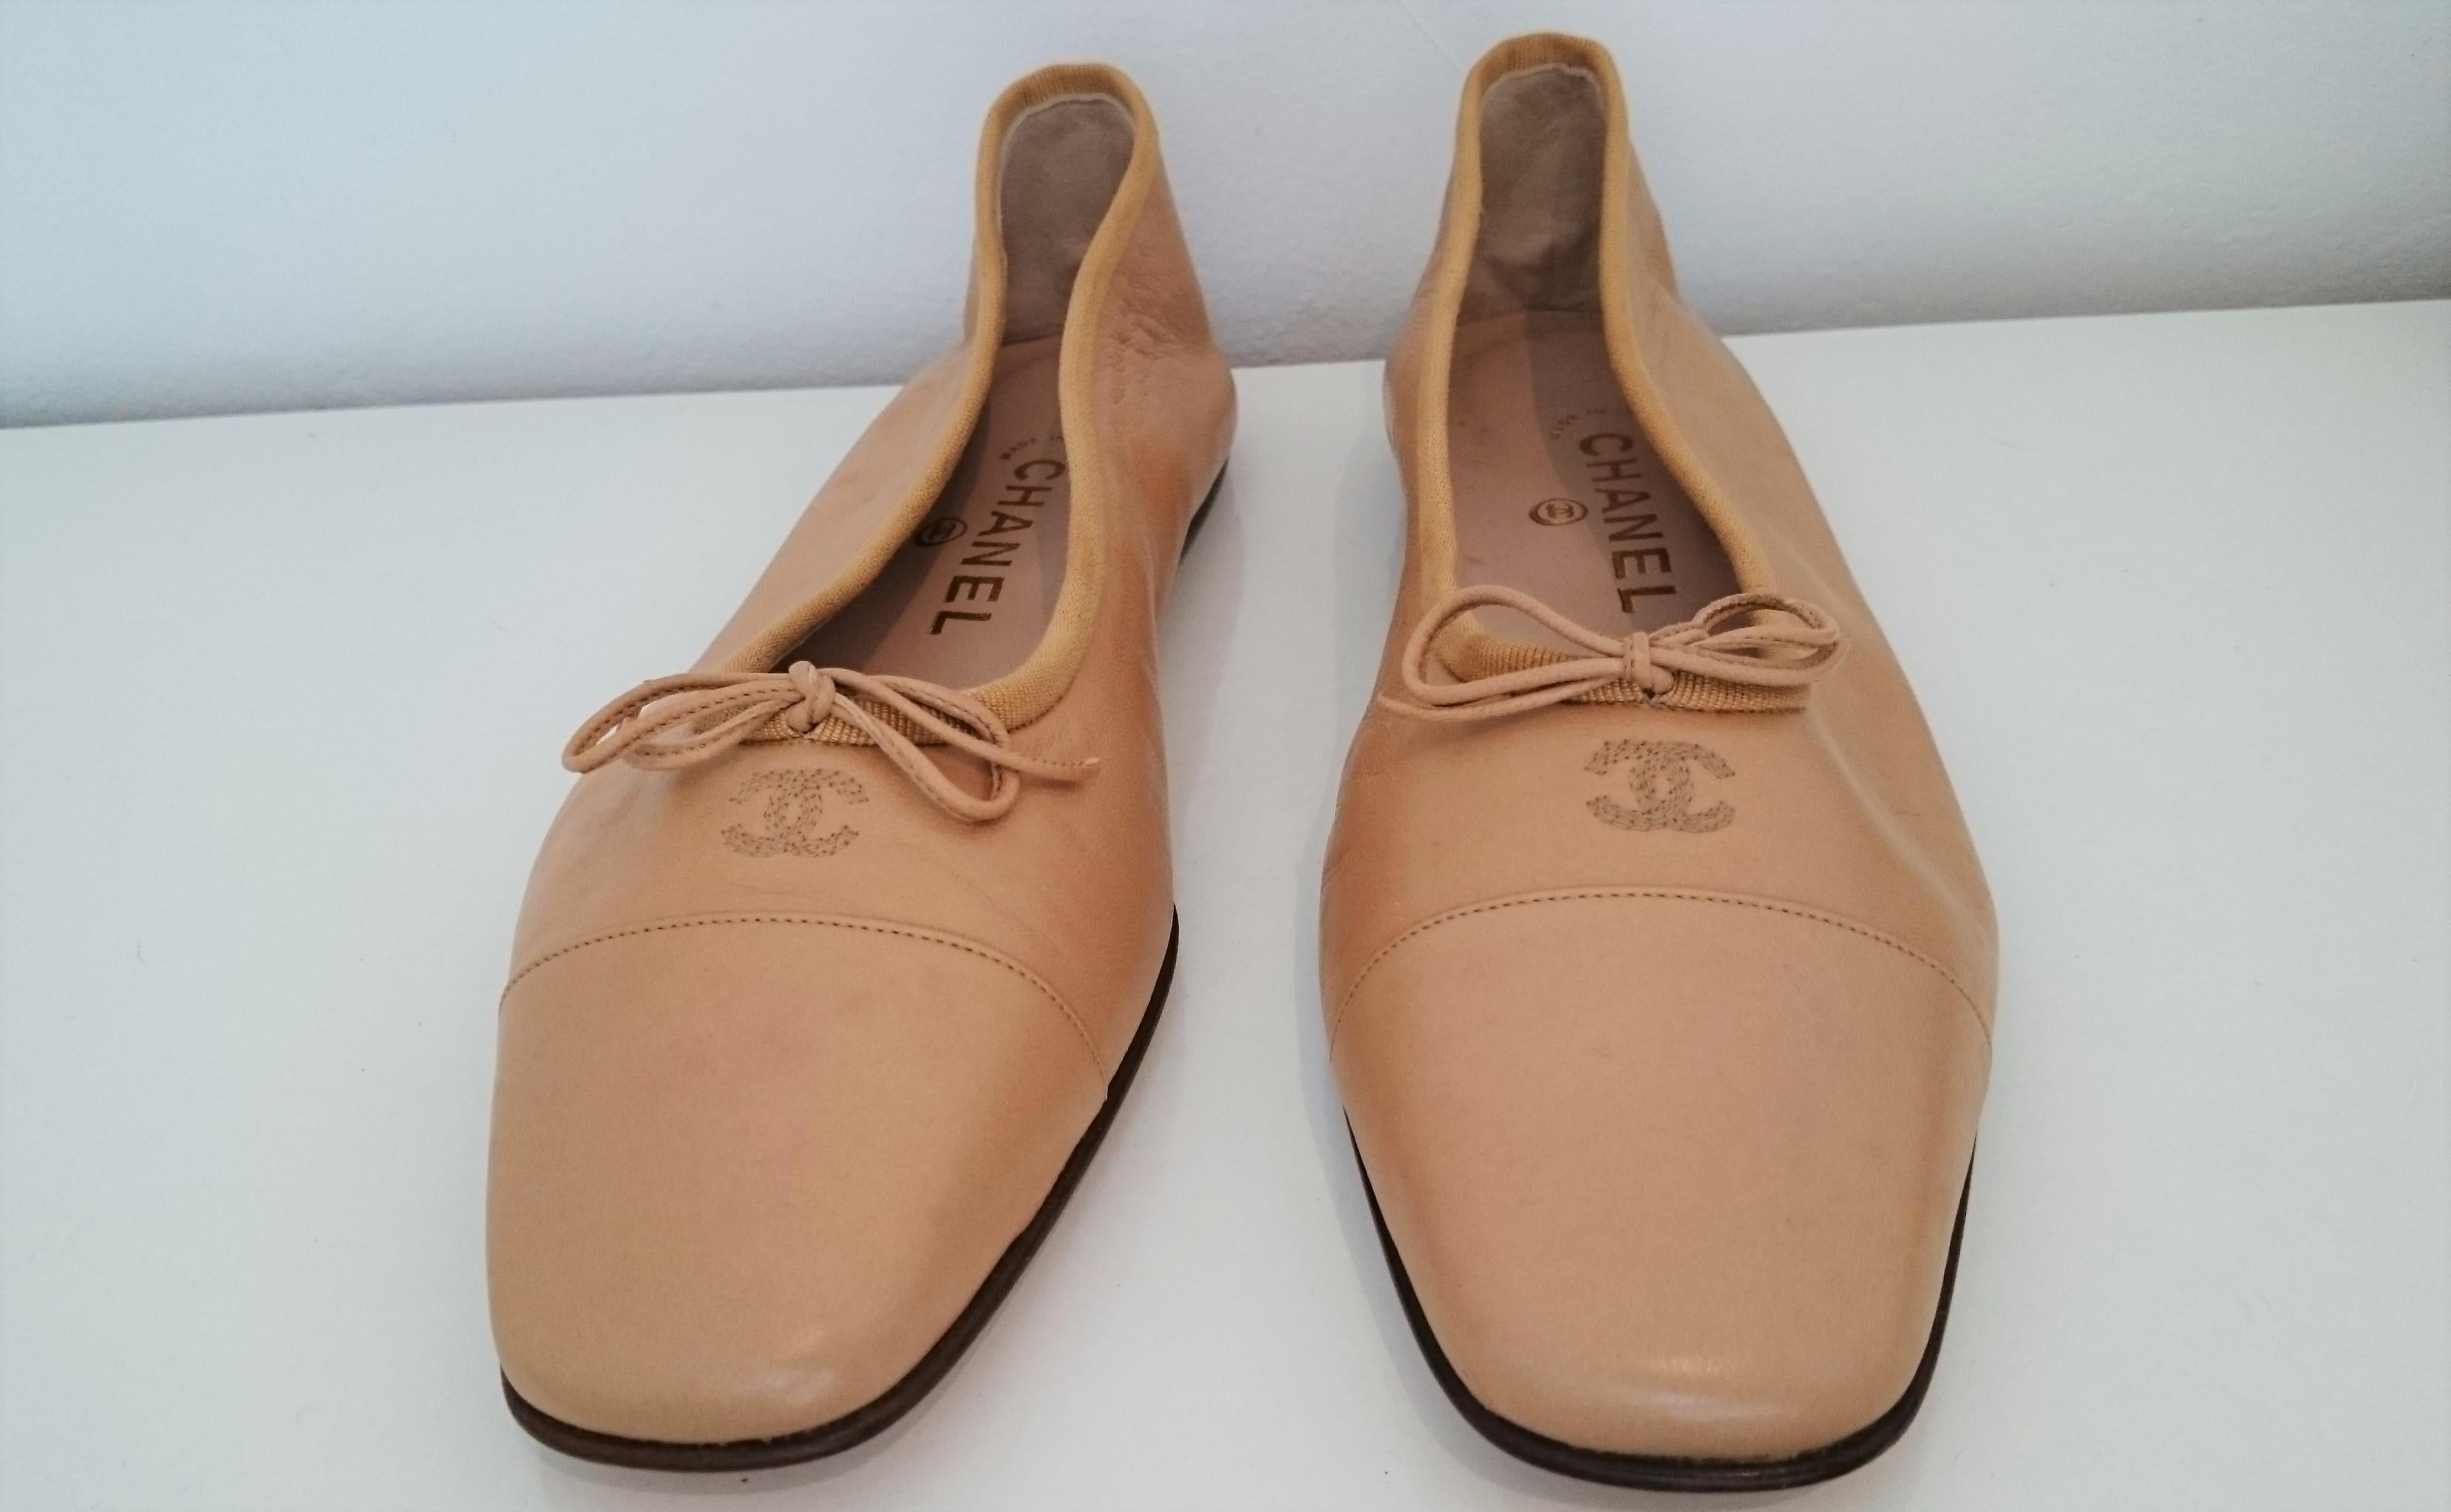 Chanel Beige Leather Laced Ballet flats with Chanel logo engraved on them.
NEW, never worn.
Original Chanel dust-bag not included.
Size 40 1/2 (EU)
Made in Italy